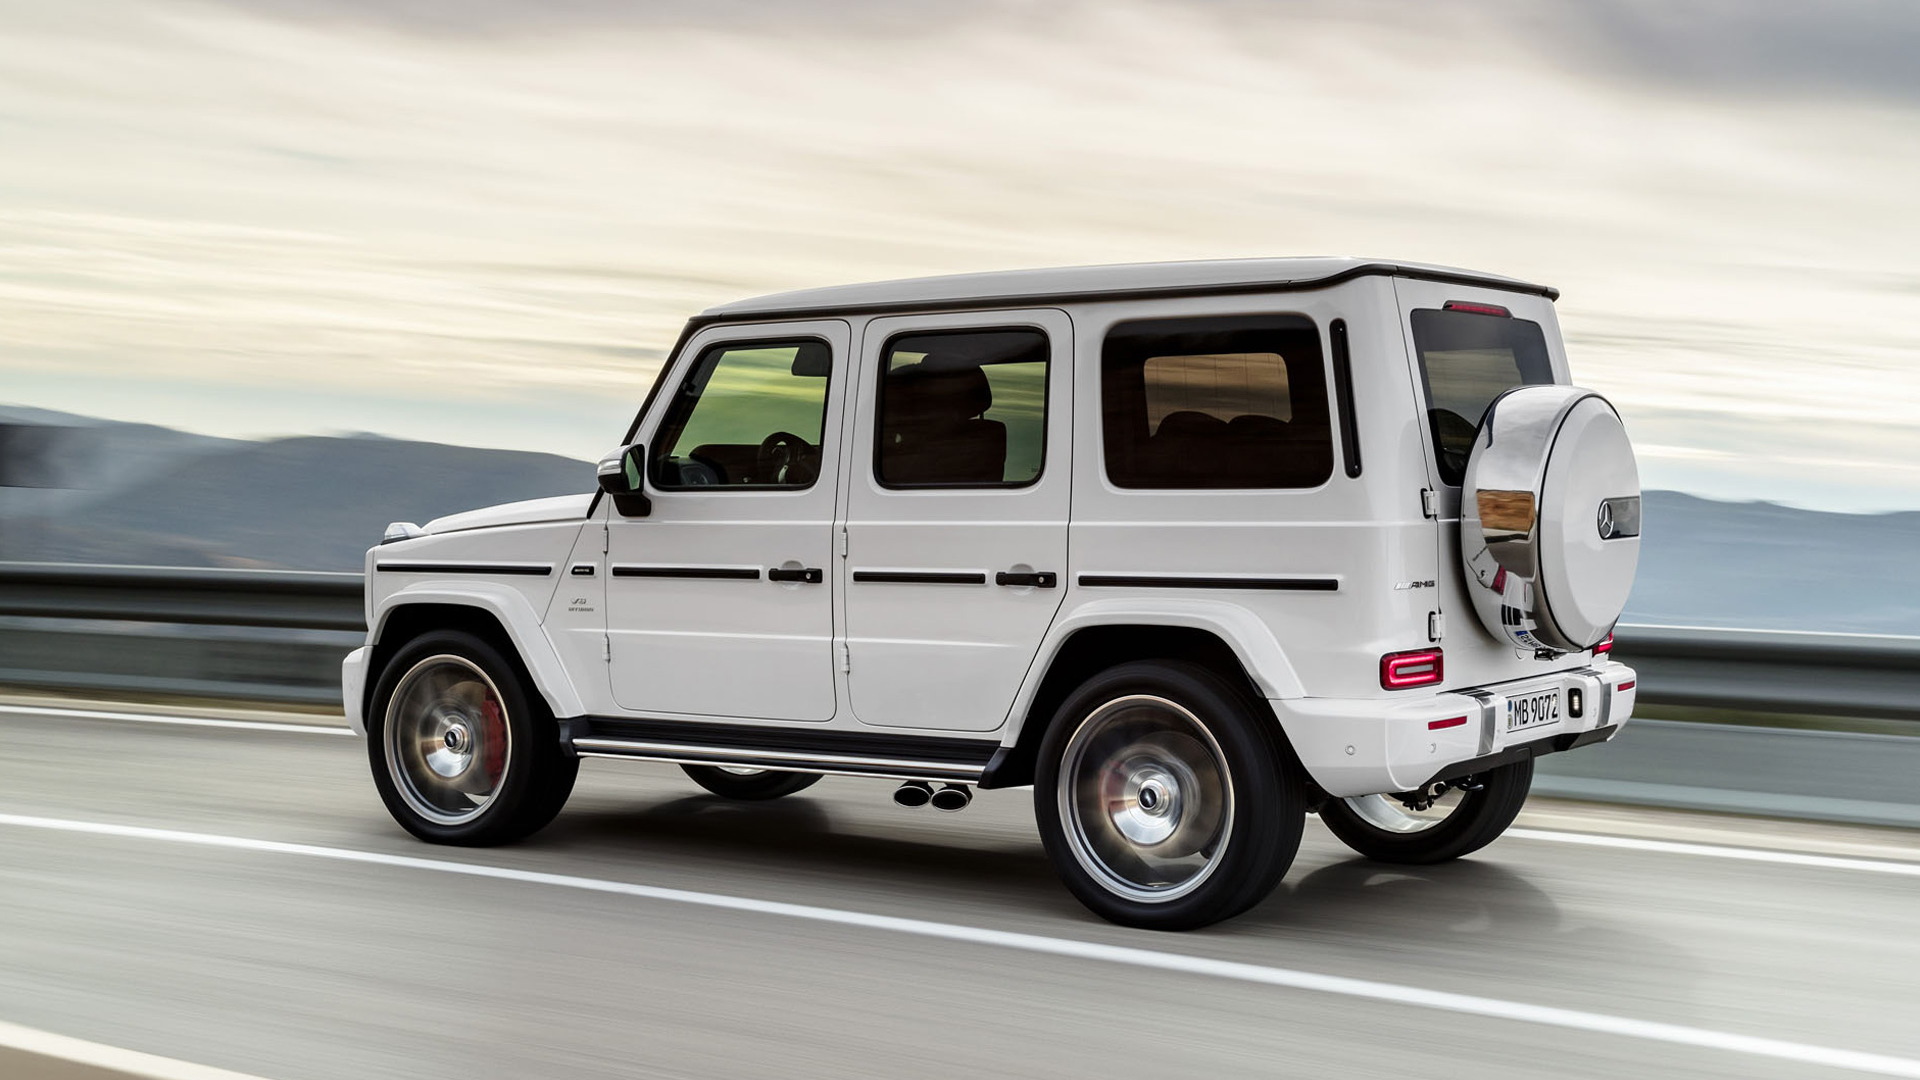 2019 Mercedes-AMG G63 muscles in with 577 horsepower